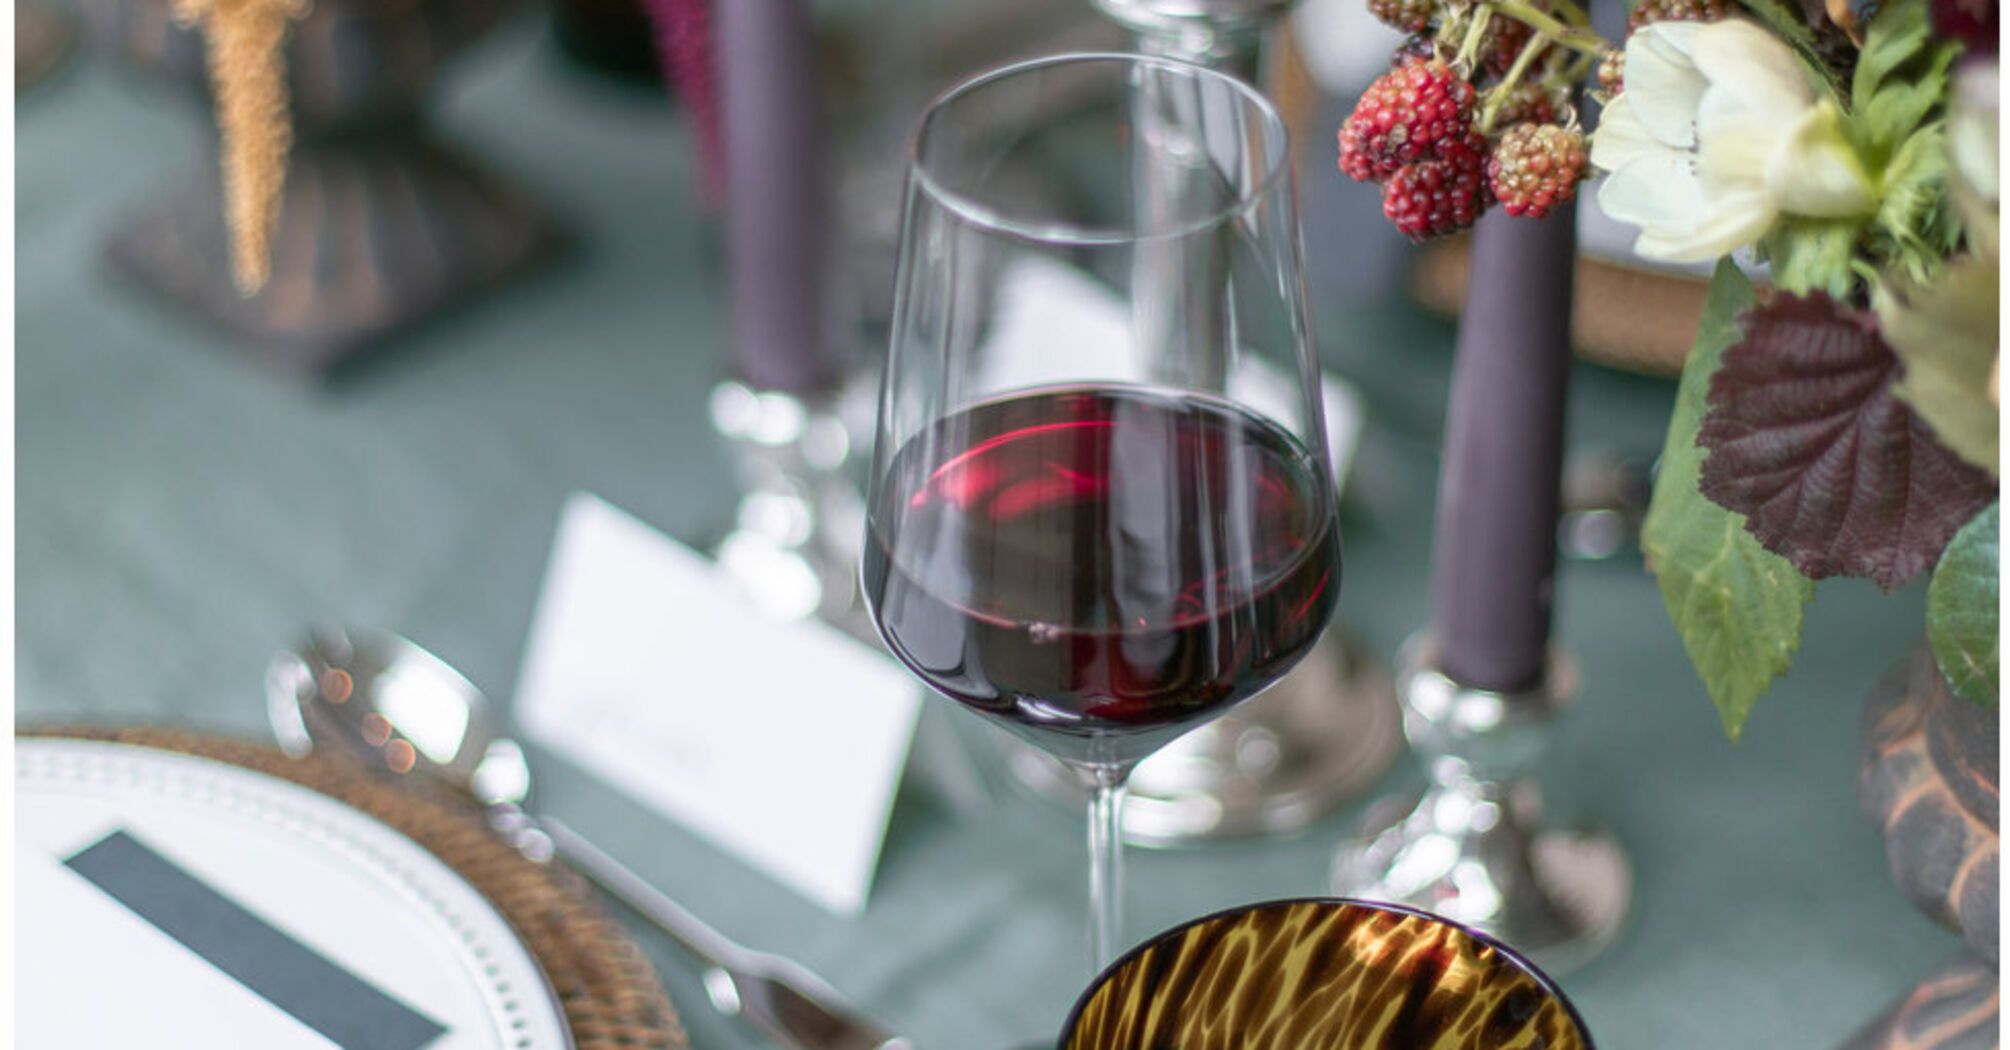 The expert told us what glasses and wine glasses should be on the wedding table